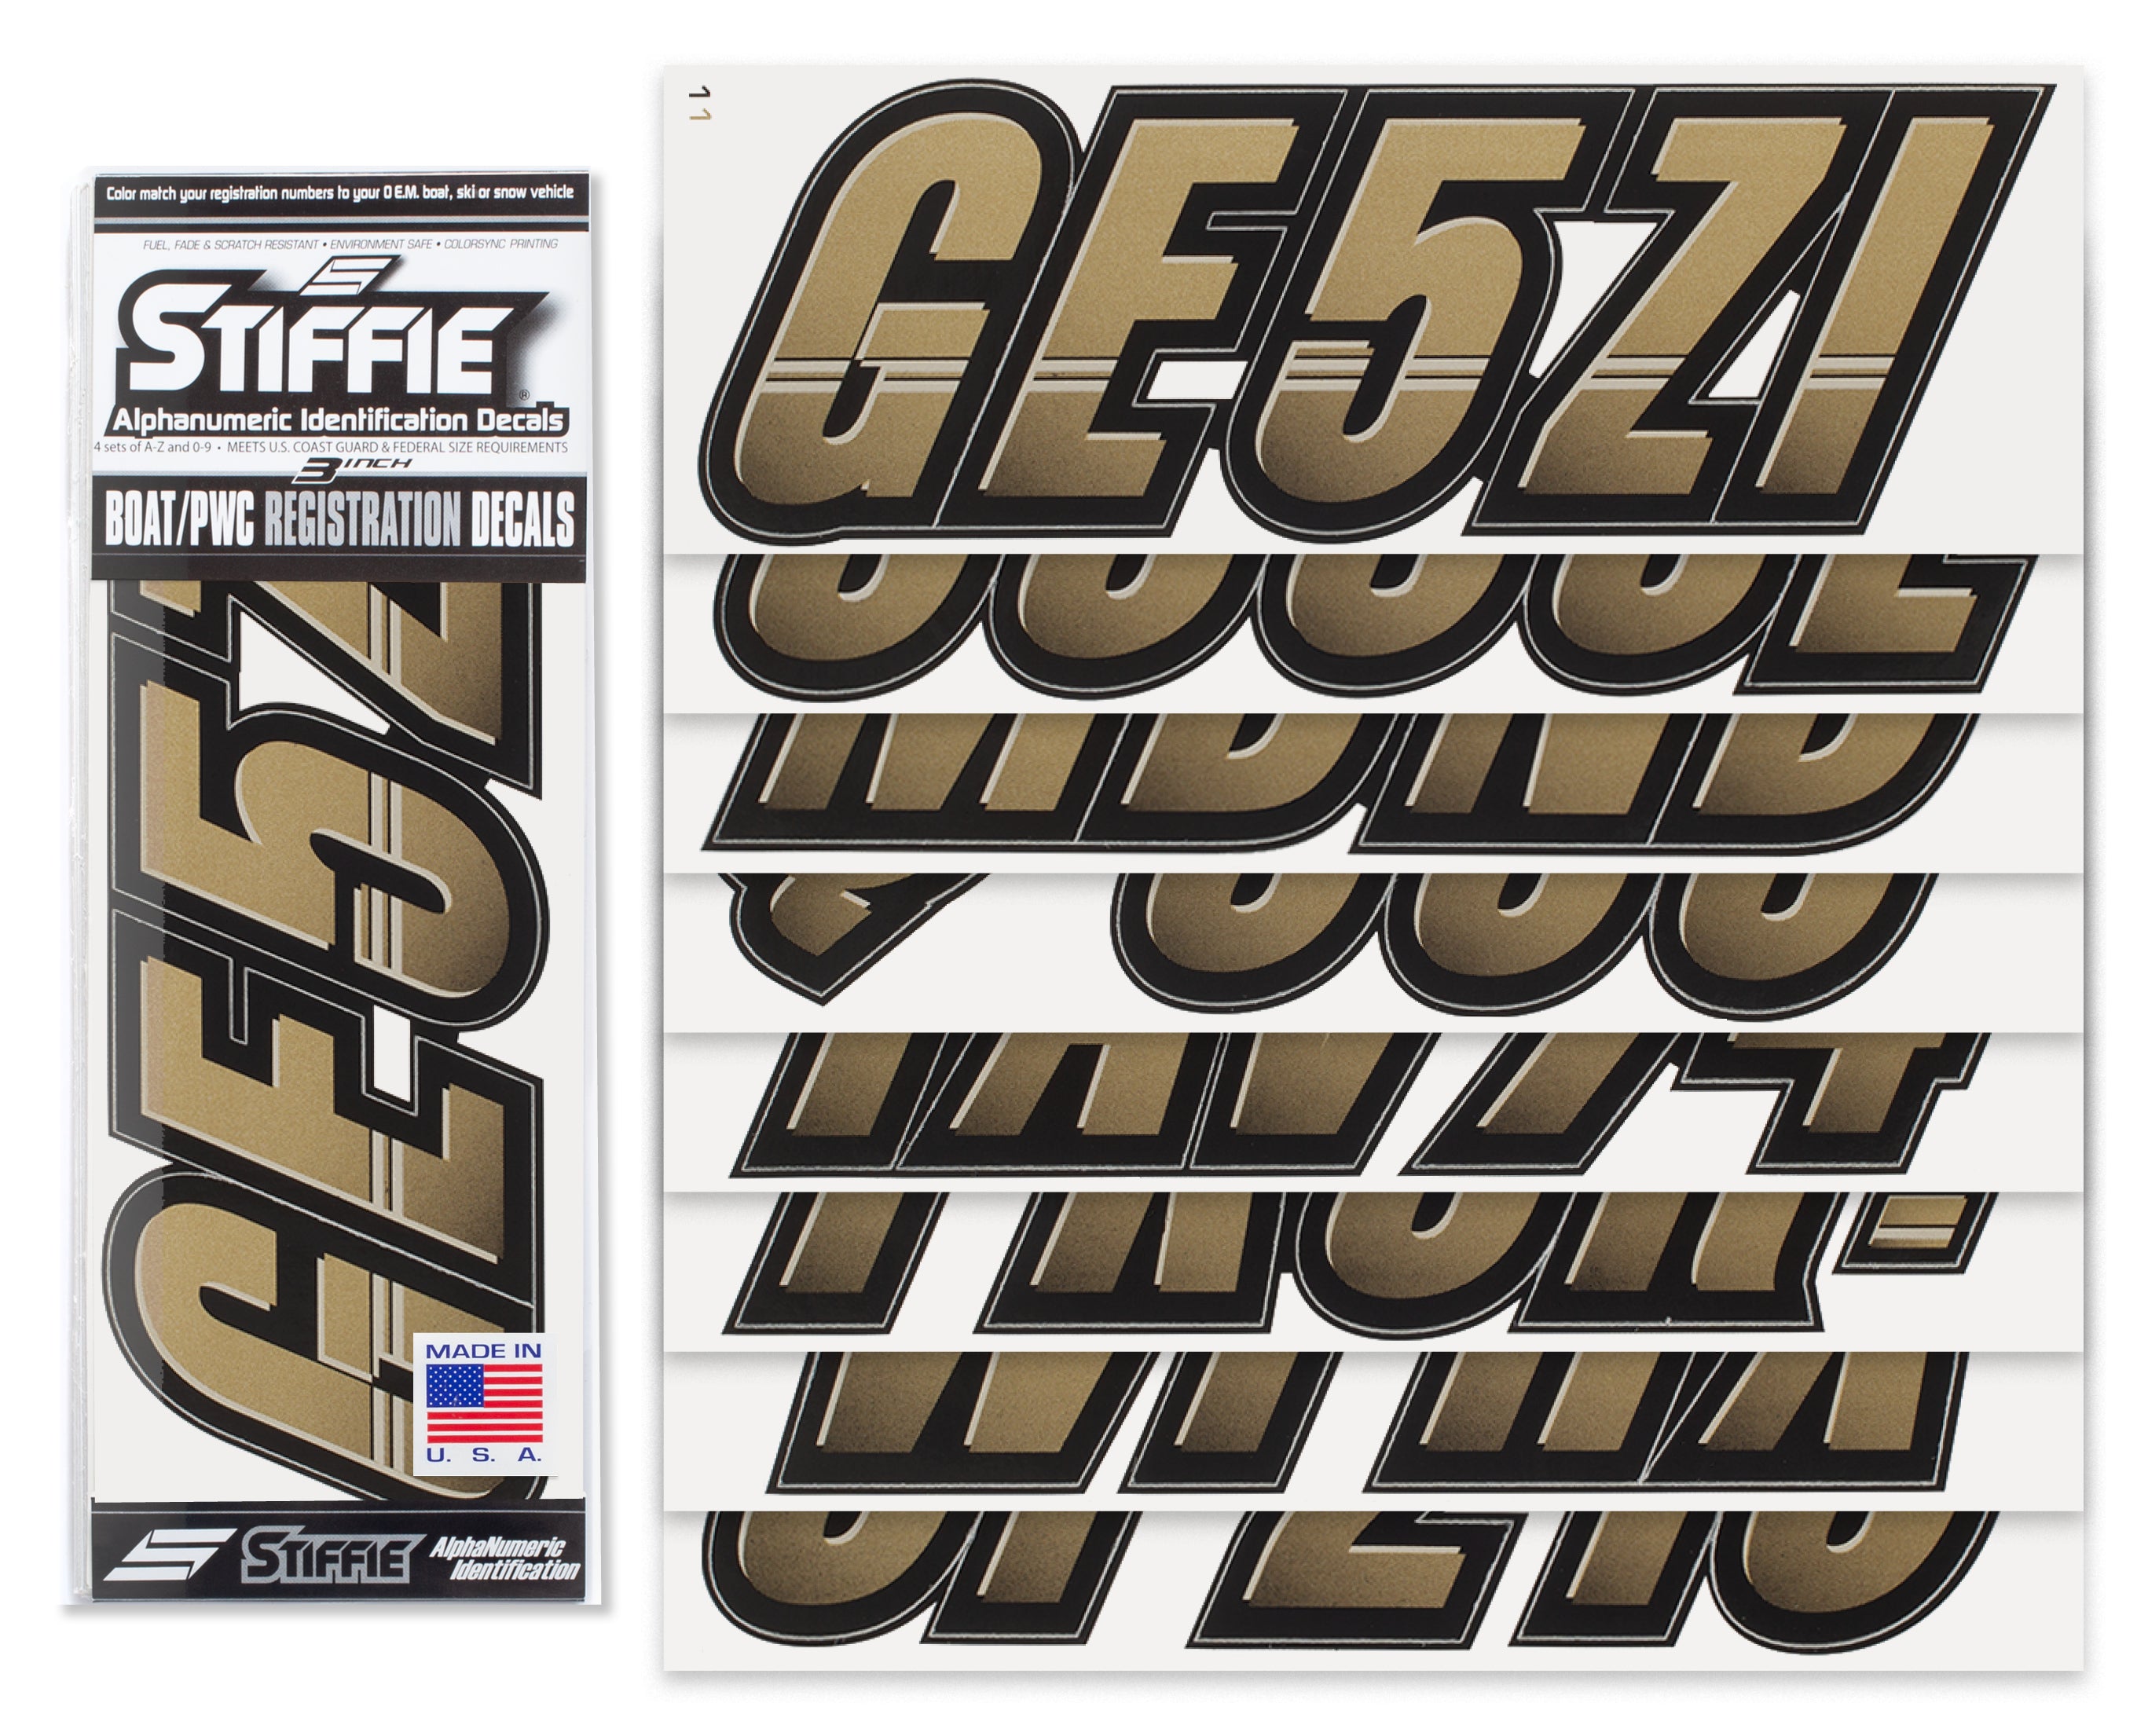 Stiffie Techtron Metallic Gold/Black 3" Alpha-Numeric Registration Identification Numbers Stickers Decals for Boats & Personal Watercraft